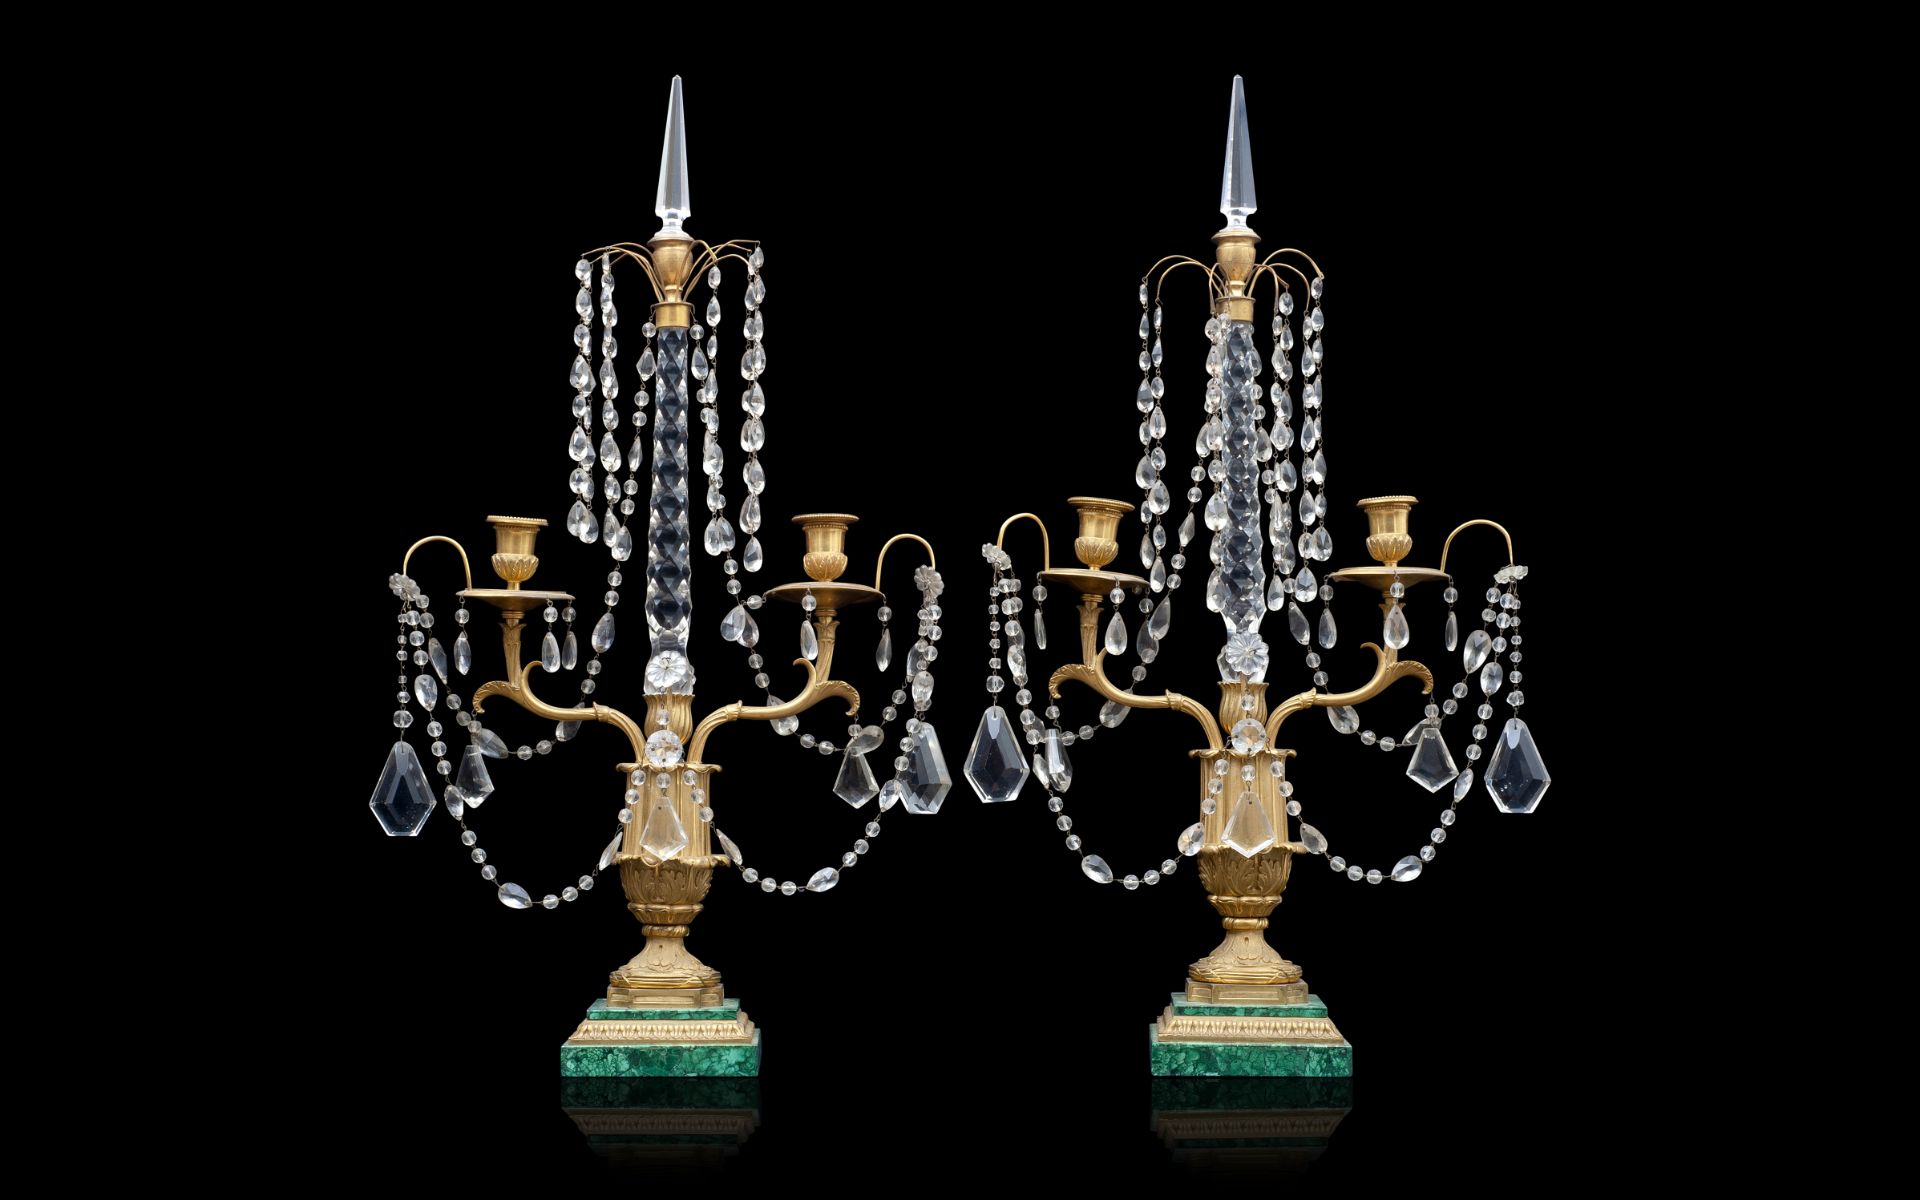 A FINE PAIR OF 19TH CENTURY GILT BRONZE AND CUT GLASS CANDELABRA, POSSIBLY RUSSIAN